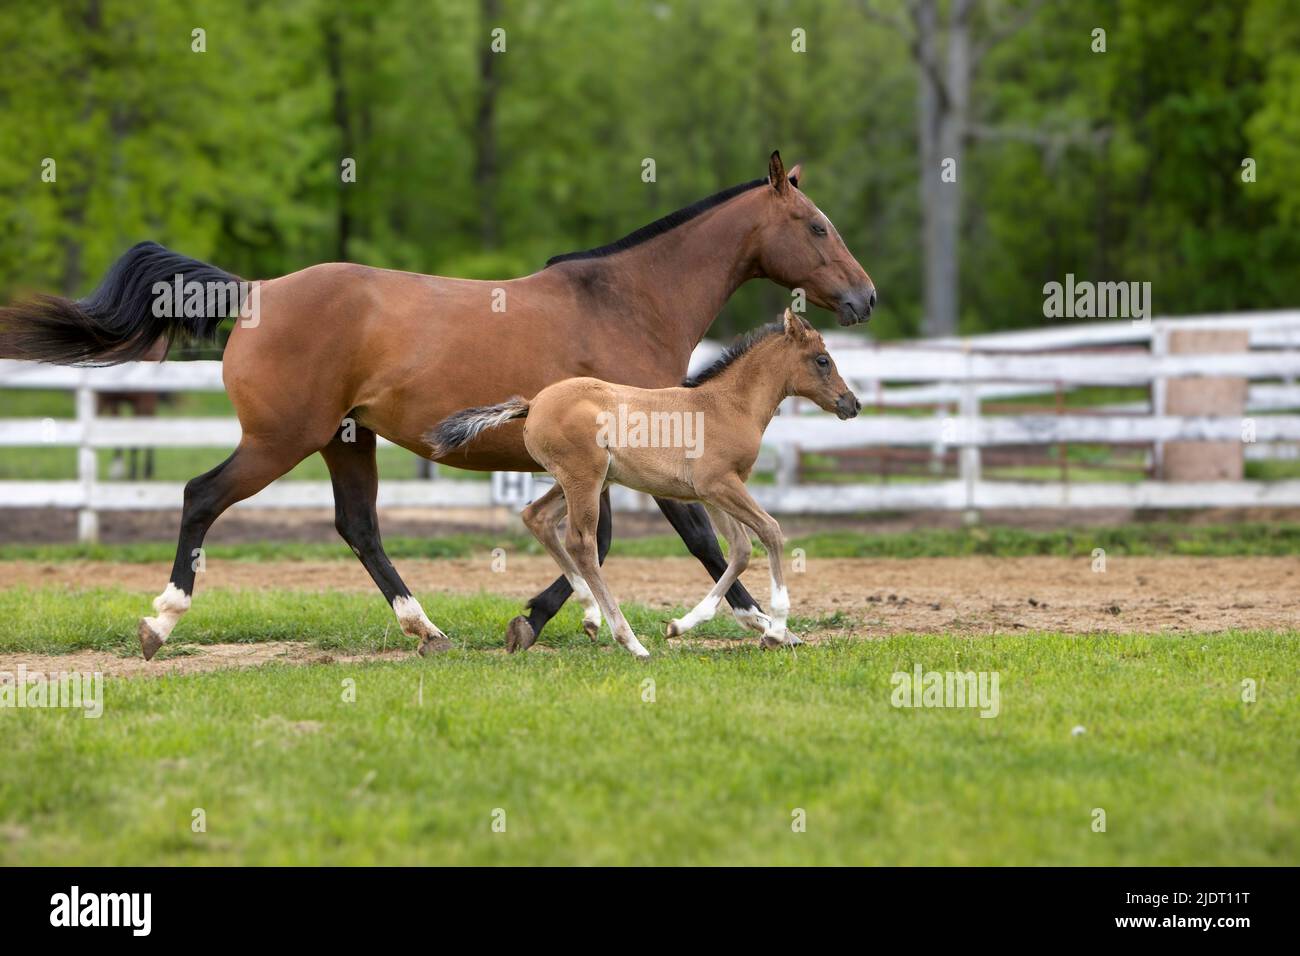 A mare and her foal trotting together in a pasture. Stock Photo